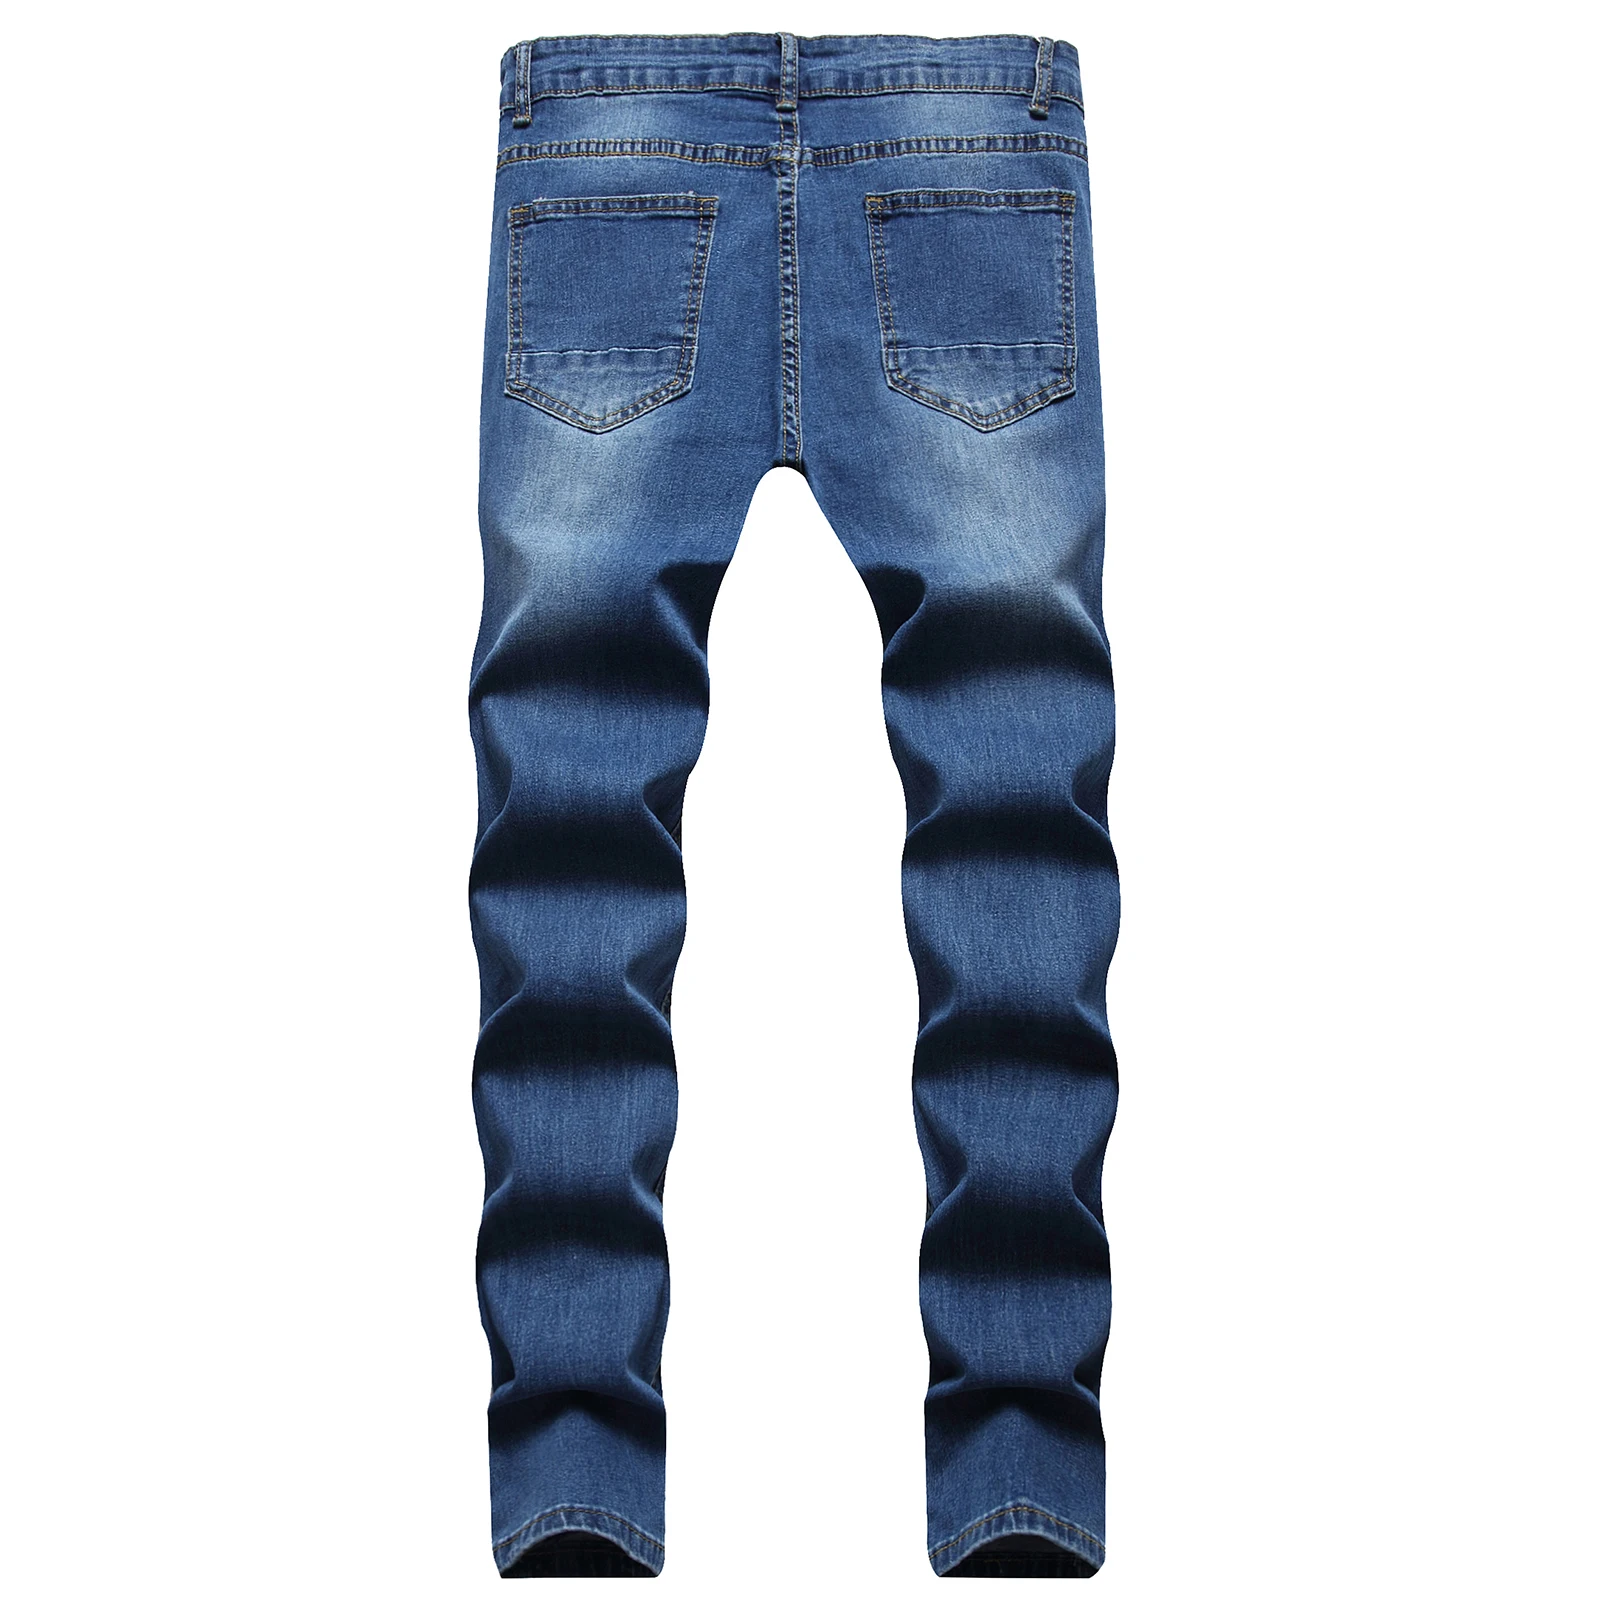 loose jeans Men's Sweatpants Sexy Hole Jeans Pants Casual Summer Autumn Male Ripped Skinny Trousers Slim Biker Outwears Pants cargo jeans